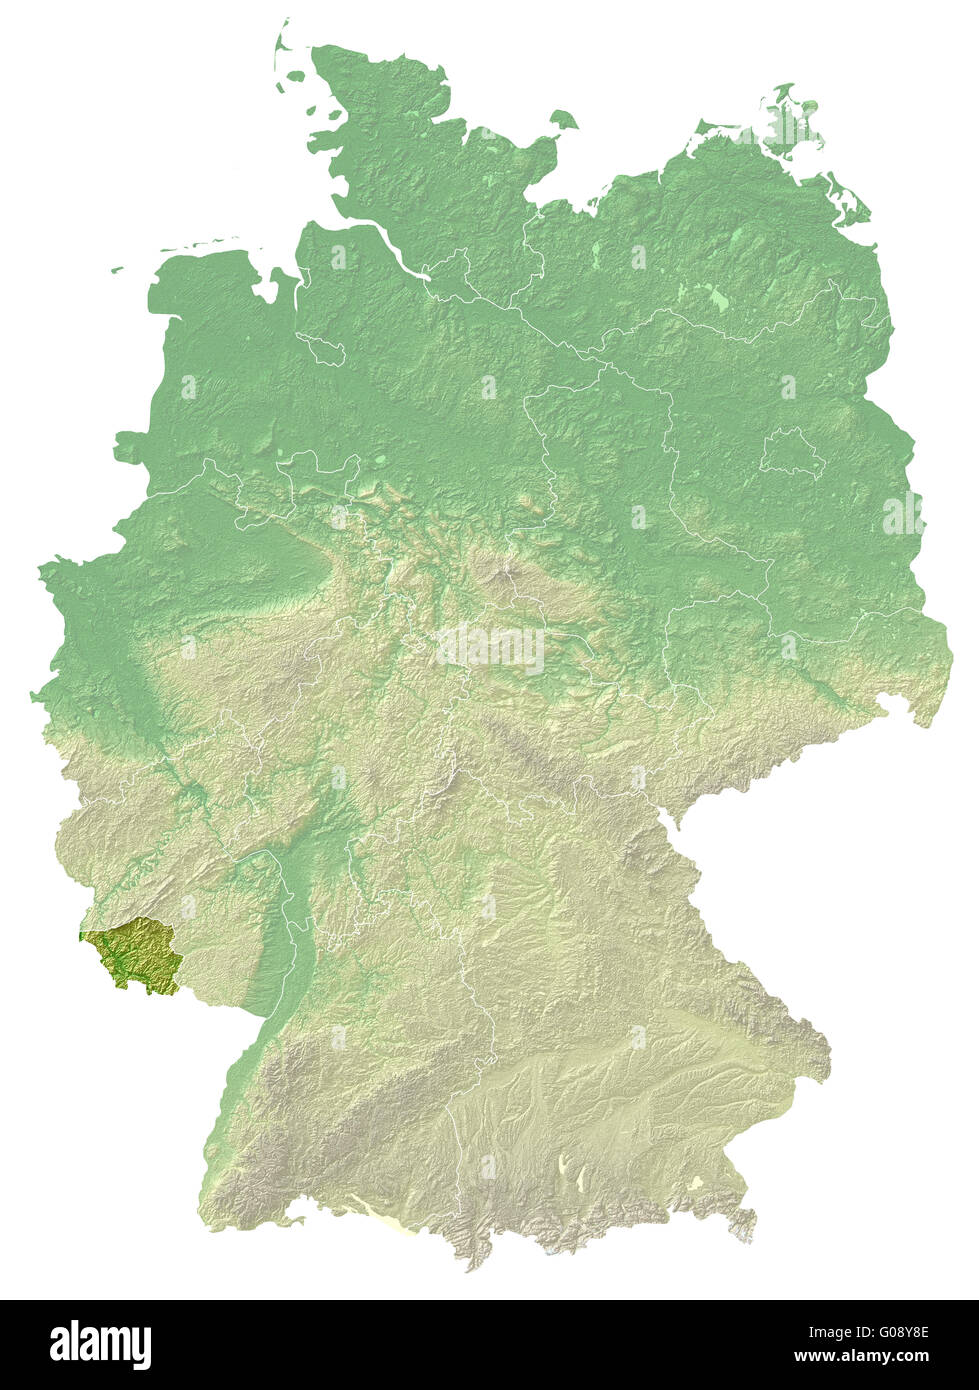 Saarland - topographical relief map Germany Stock Photo